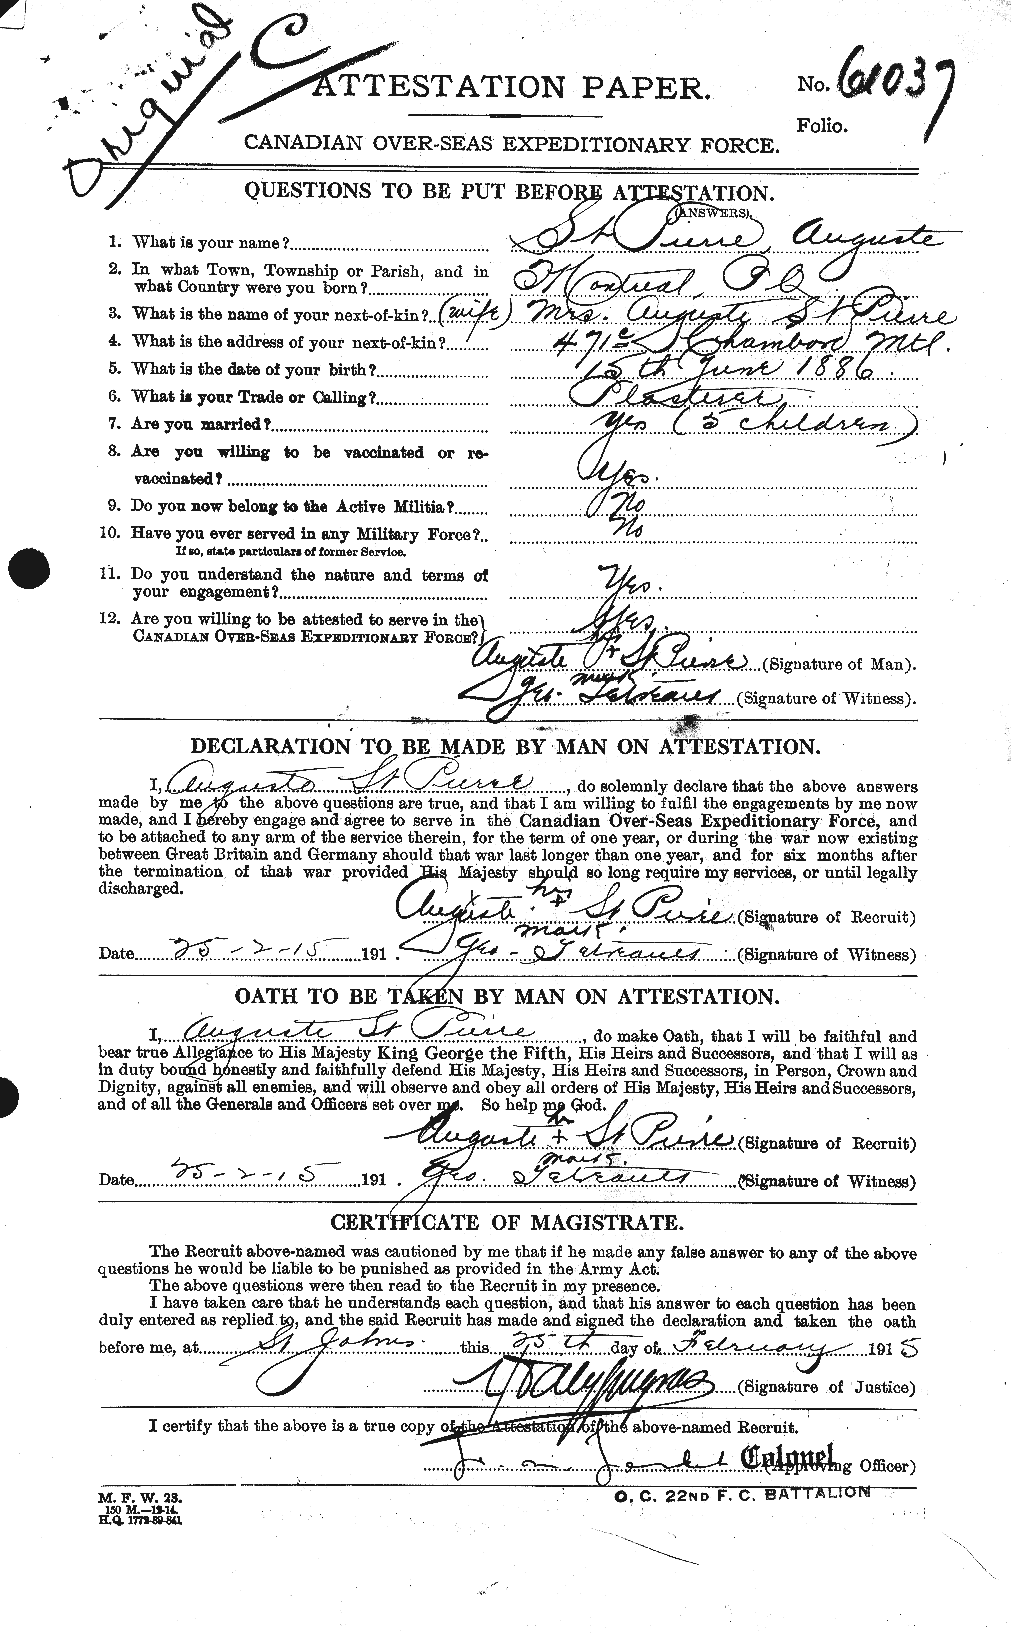 Personnel Records of the First World War - CEF 077844a